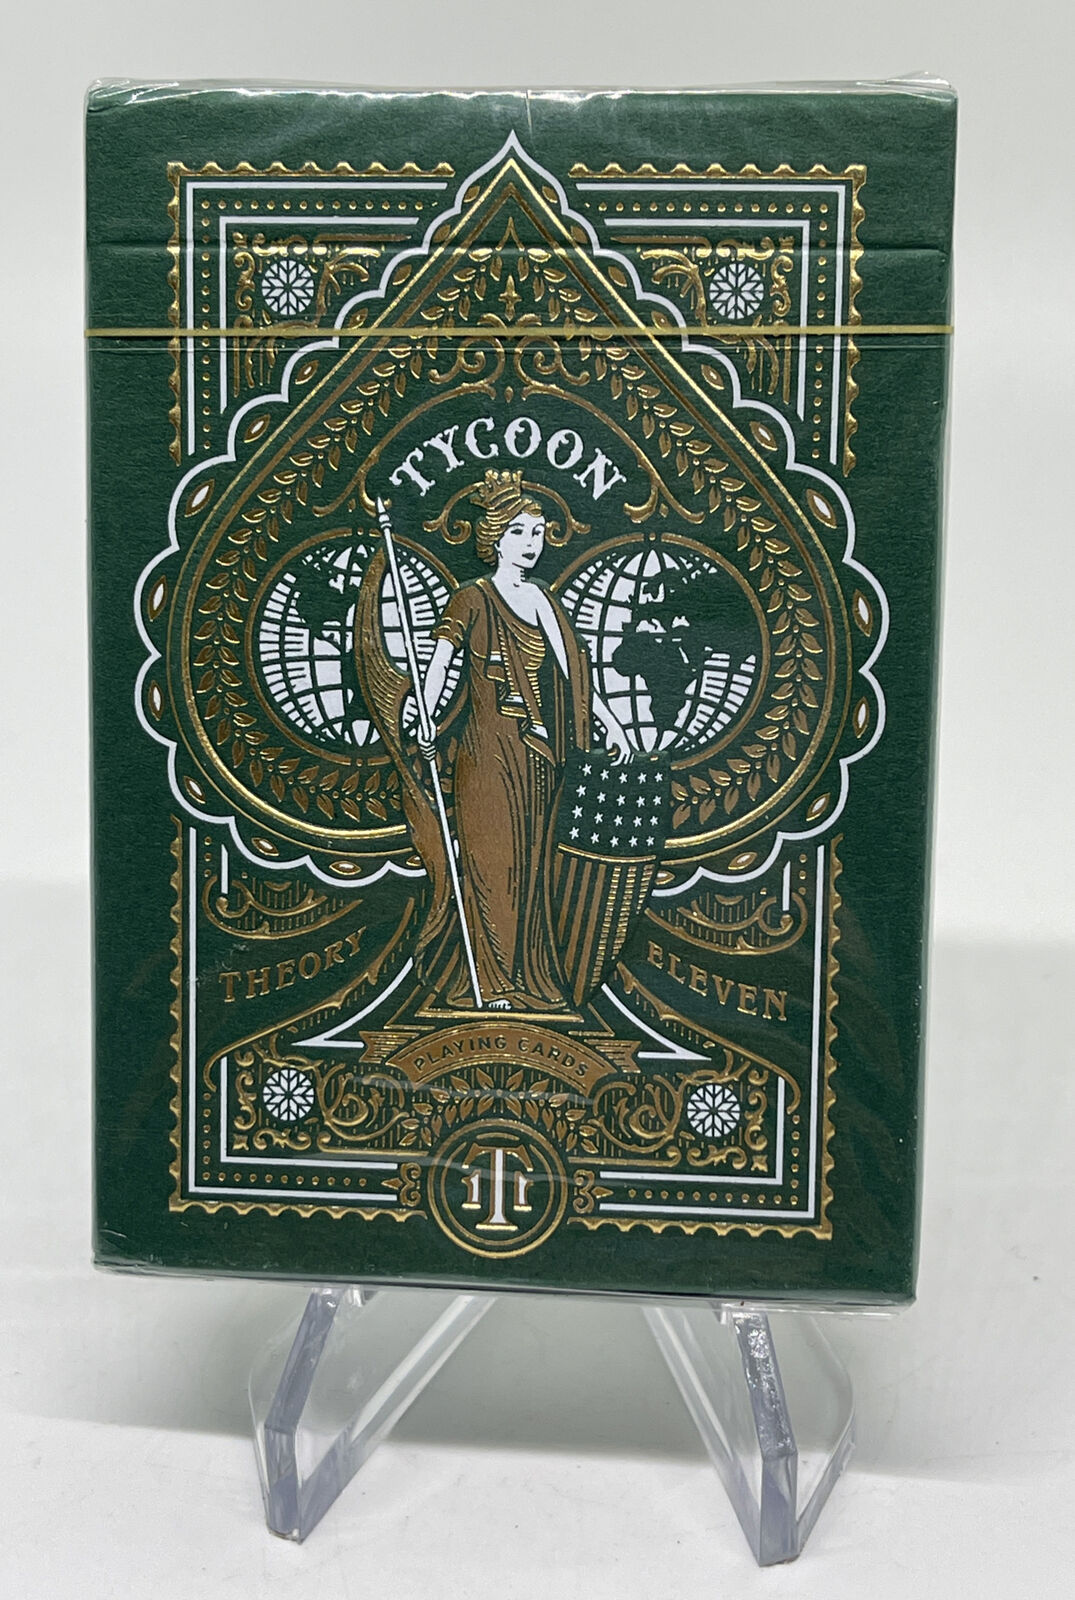 Theory 11 Green Tycoon Premium Playing Cards New Sealed